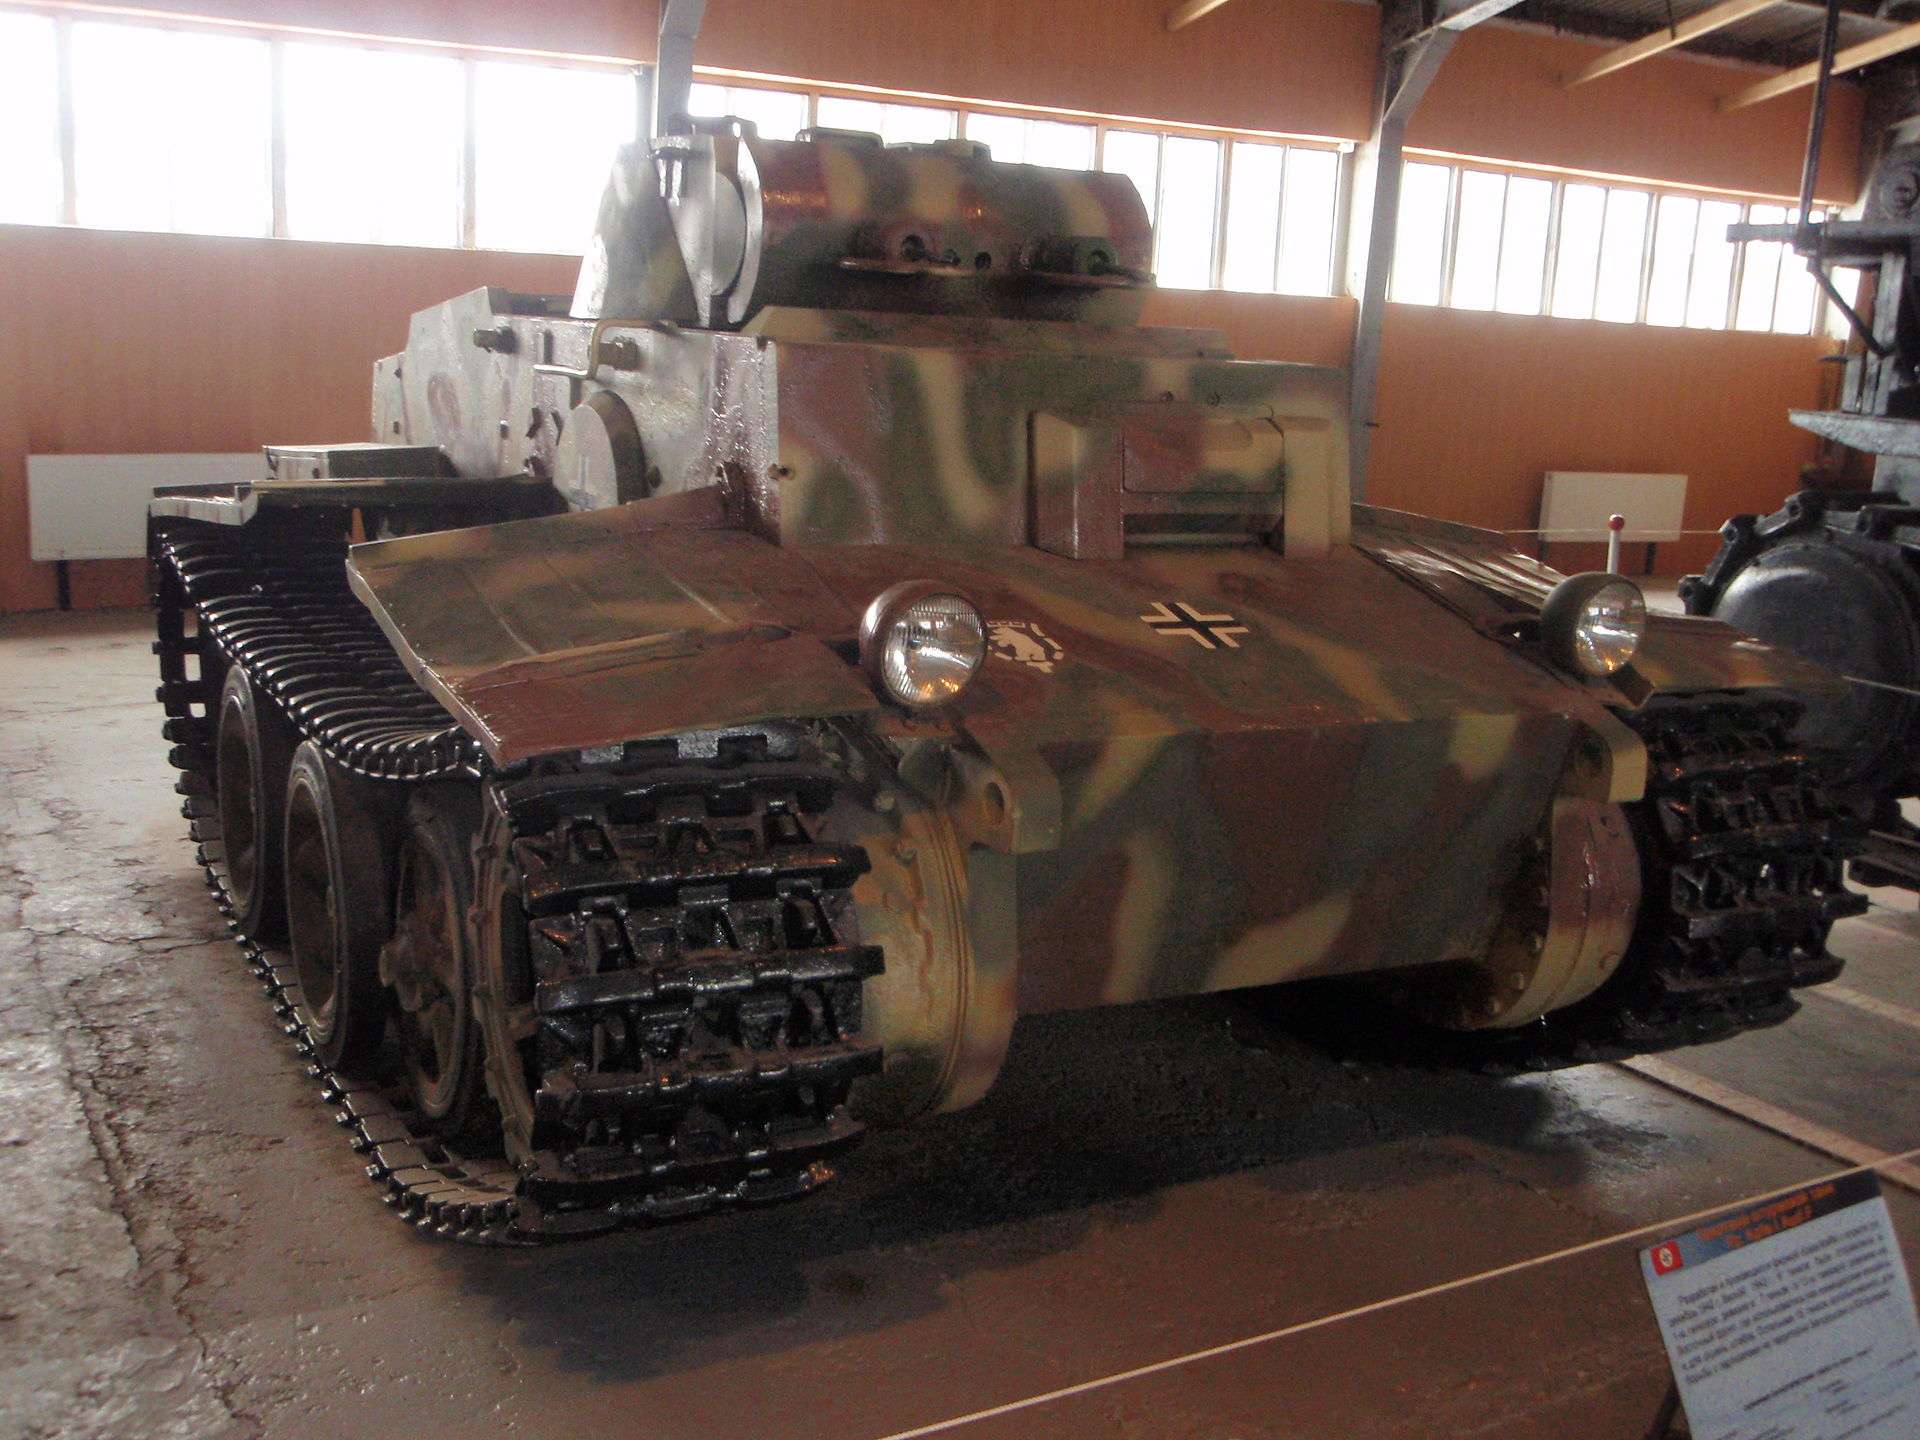 The Panzer I Ausf. F.